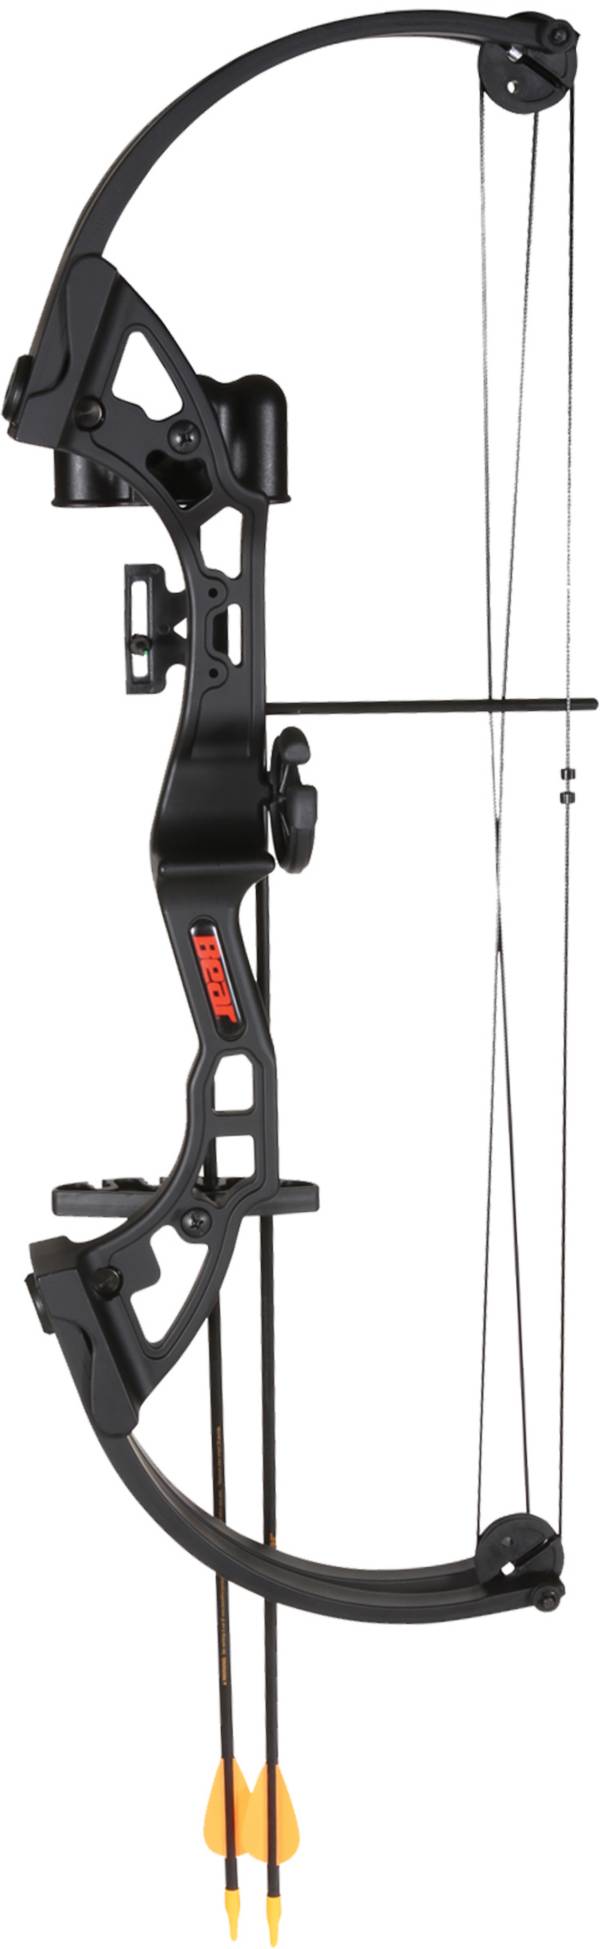 Bear Archery Youth Brave Compound Bow Package product image